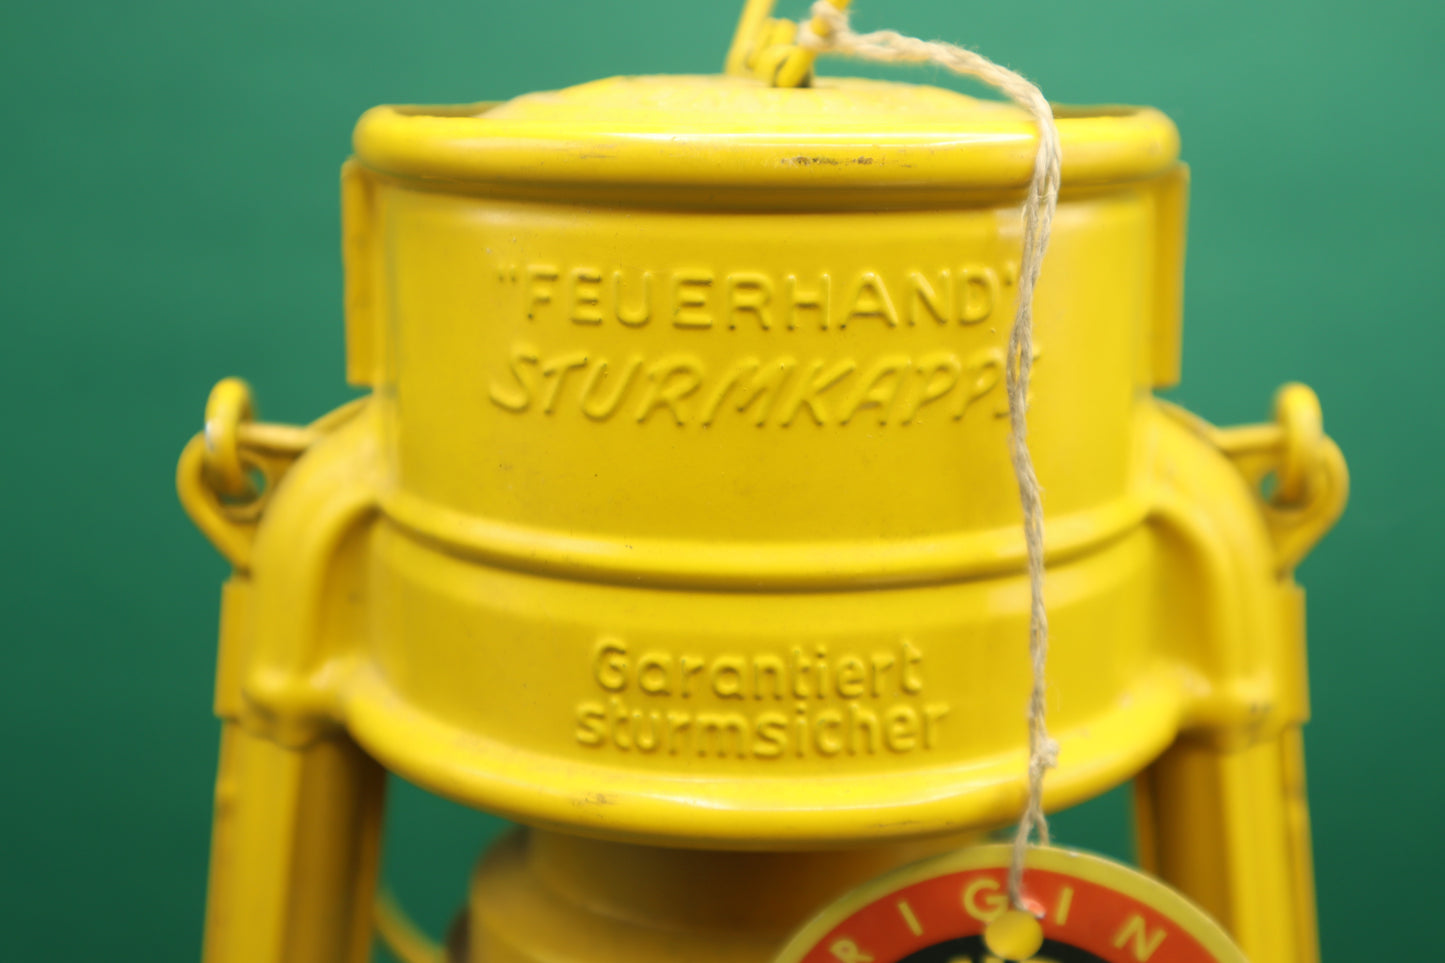 Vintage Antique style Original Nier Feuerhand Yellow storm Lantern Made in Germany Camping Decor